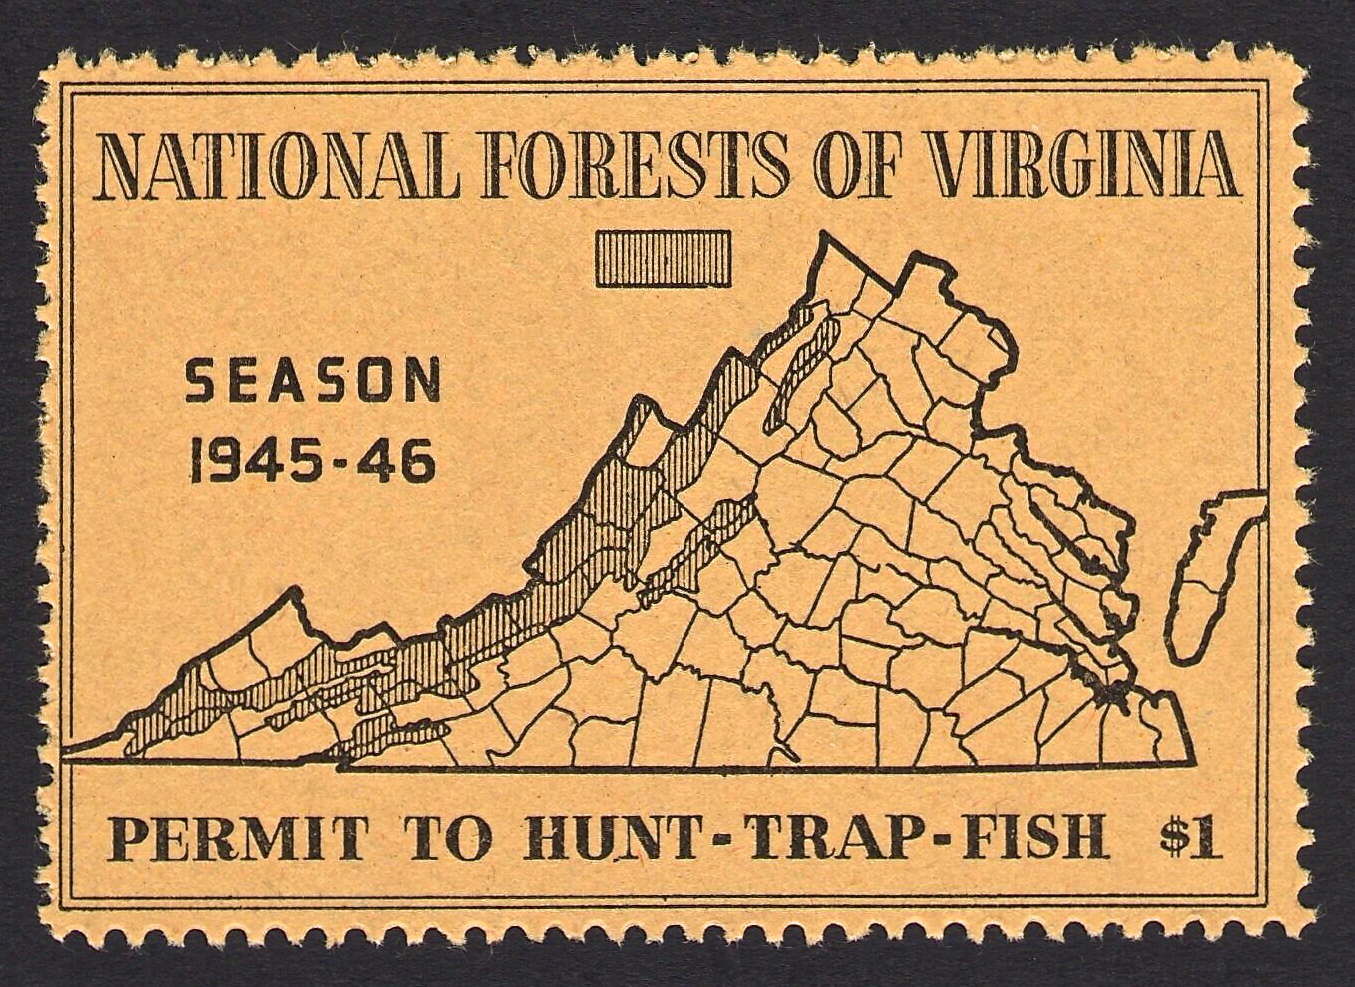 1945-46 National Forest Virginia